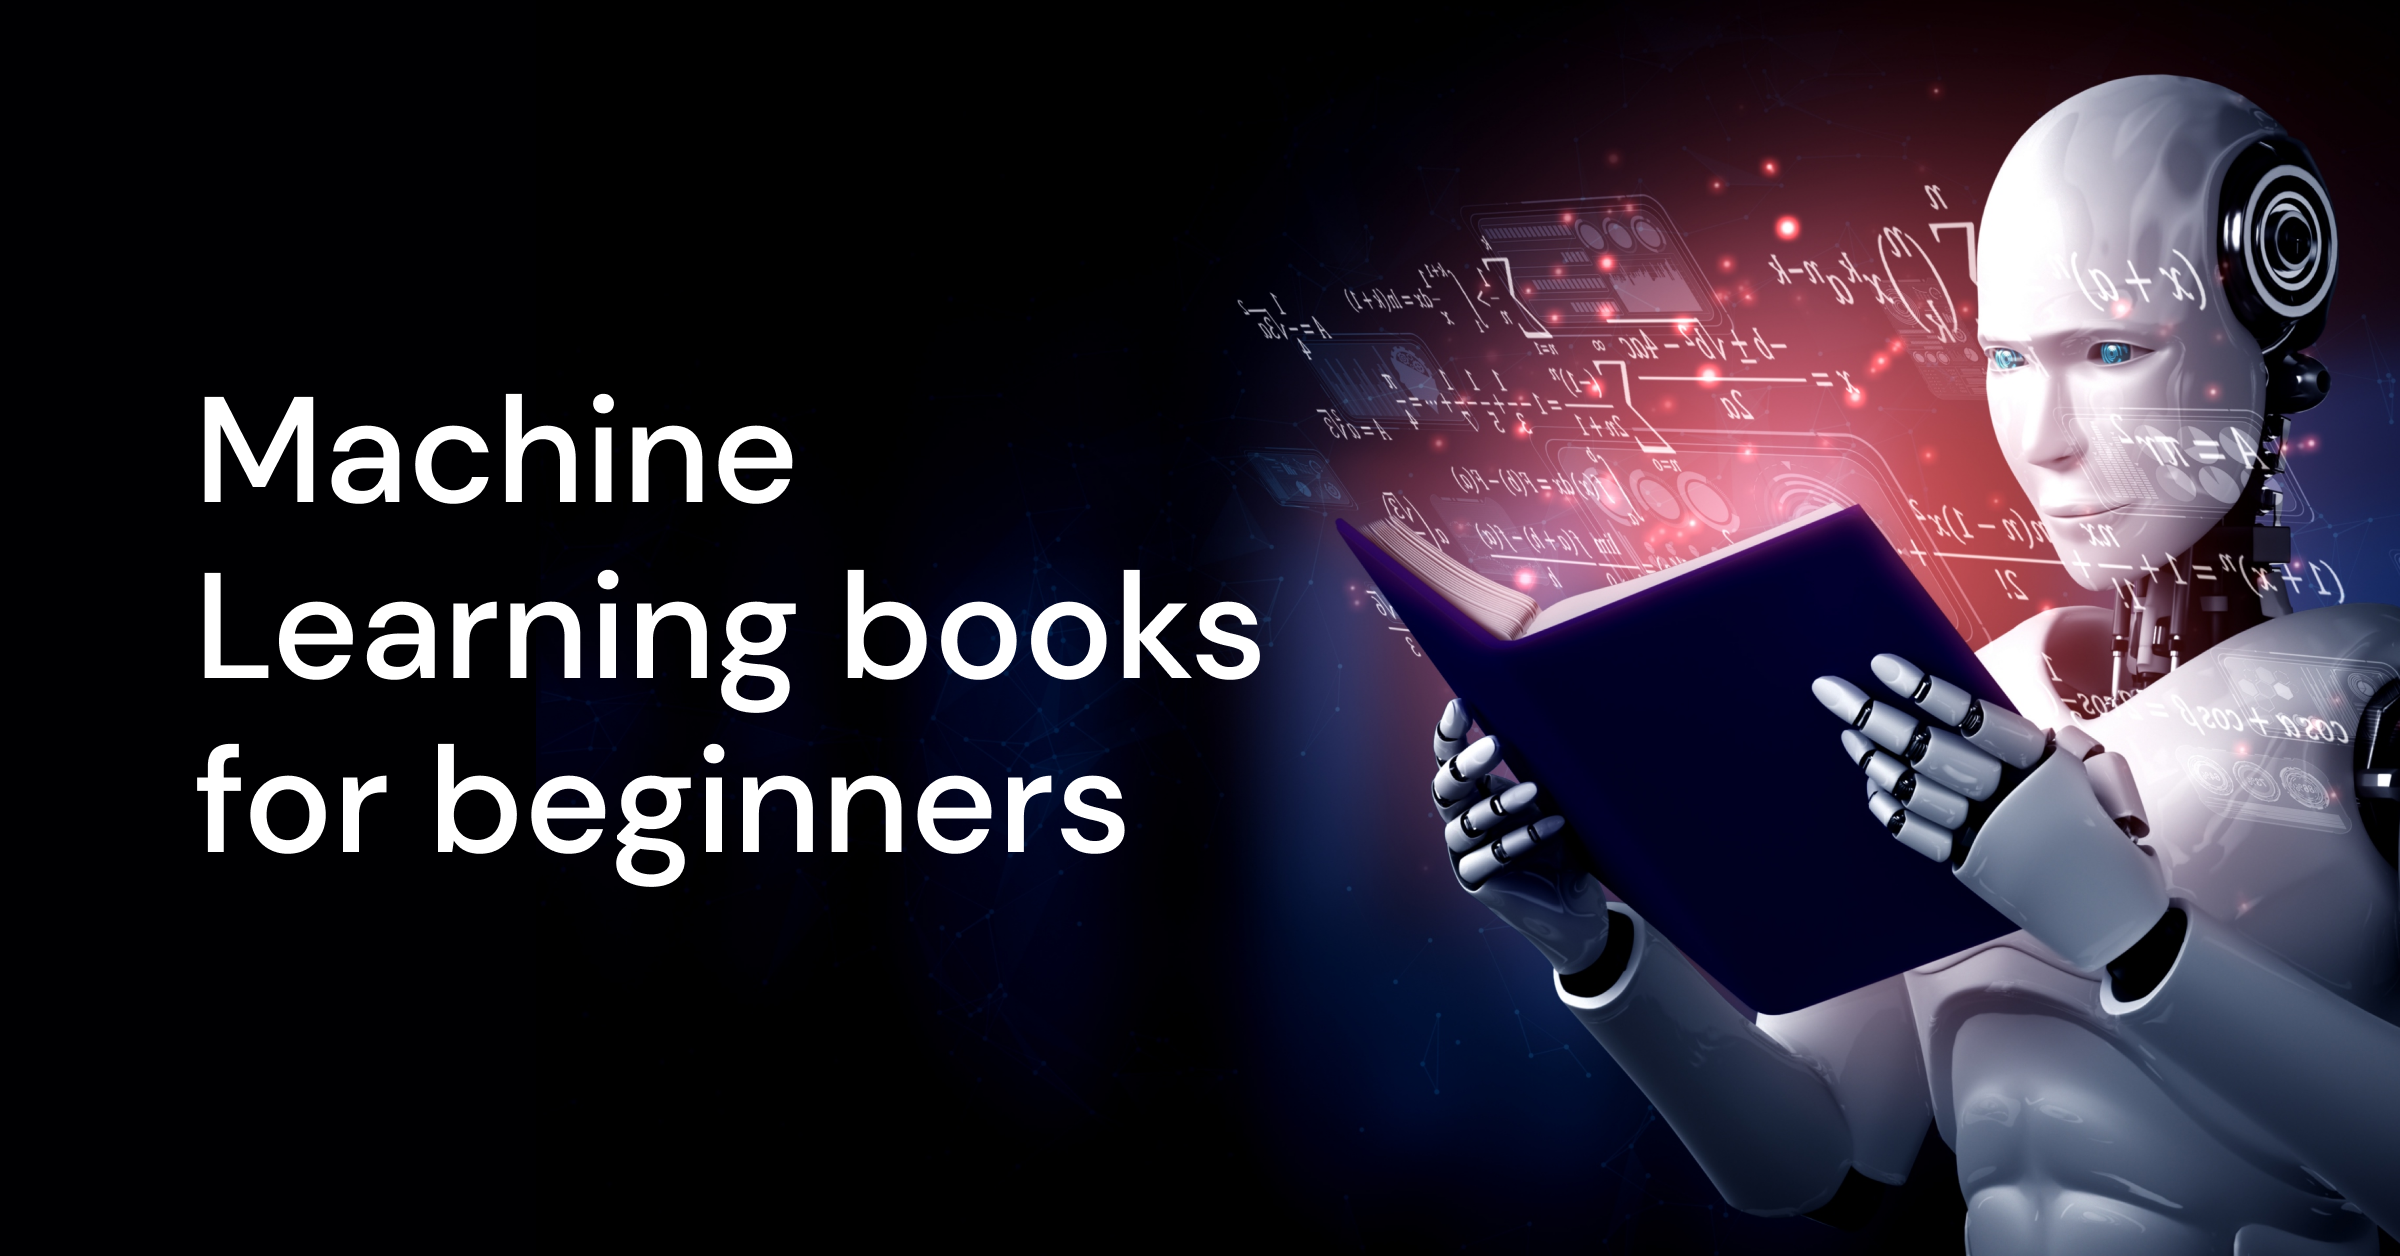 Top Machine Learning books for beginners